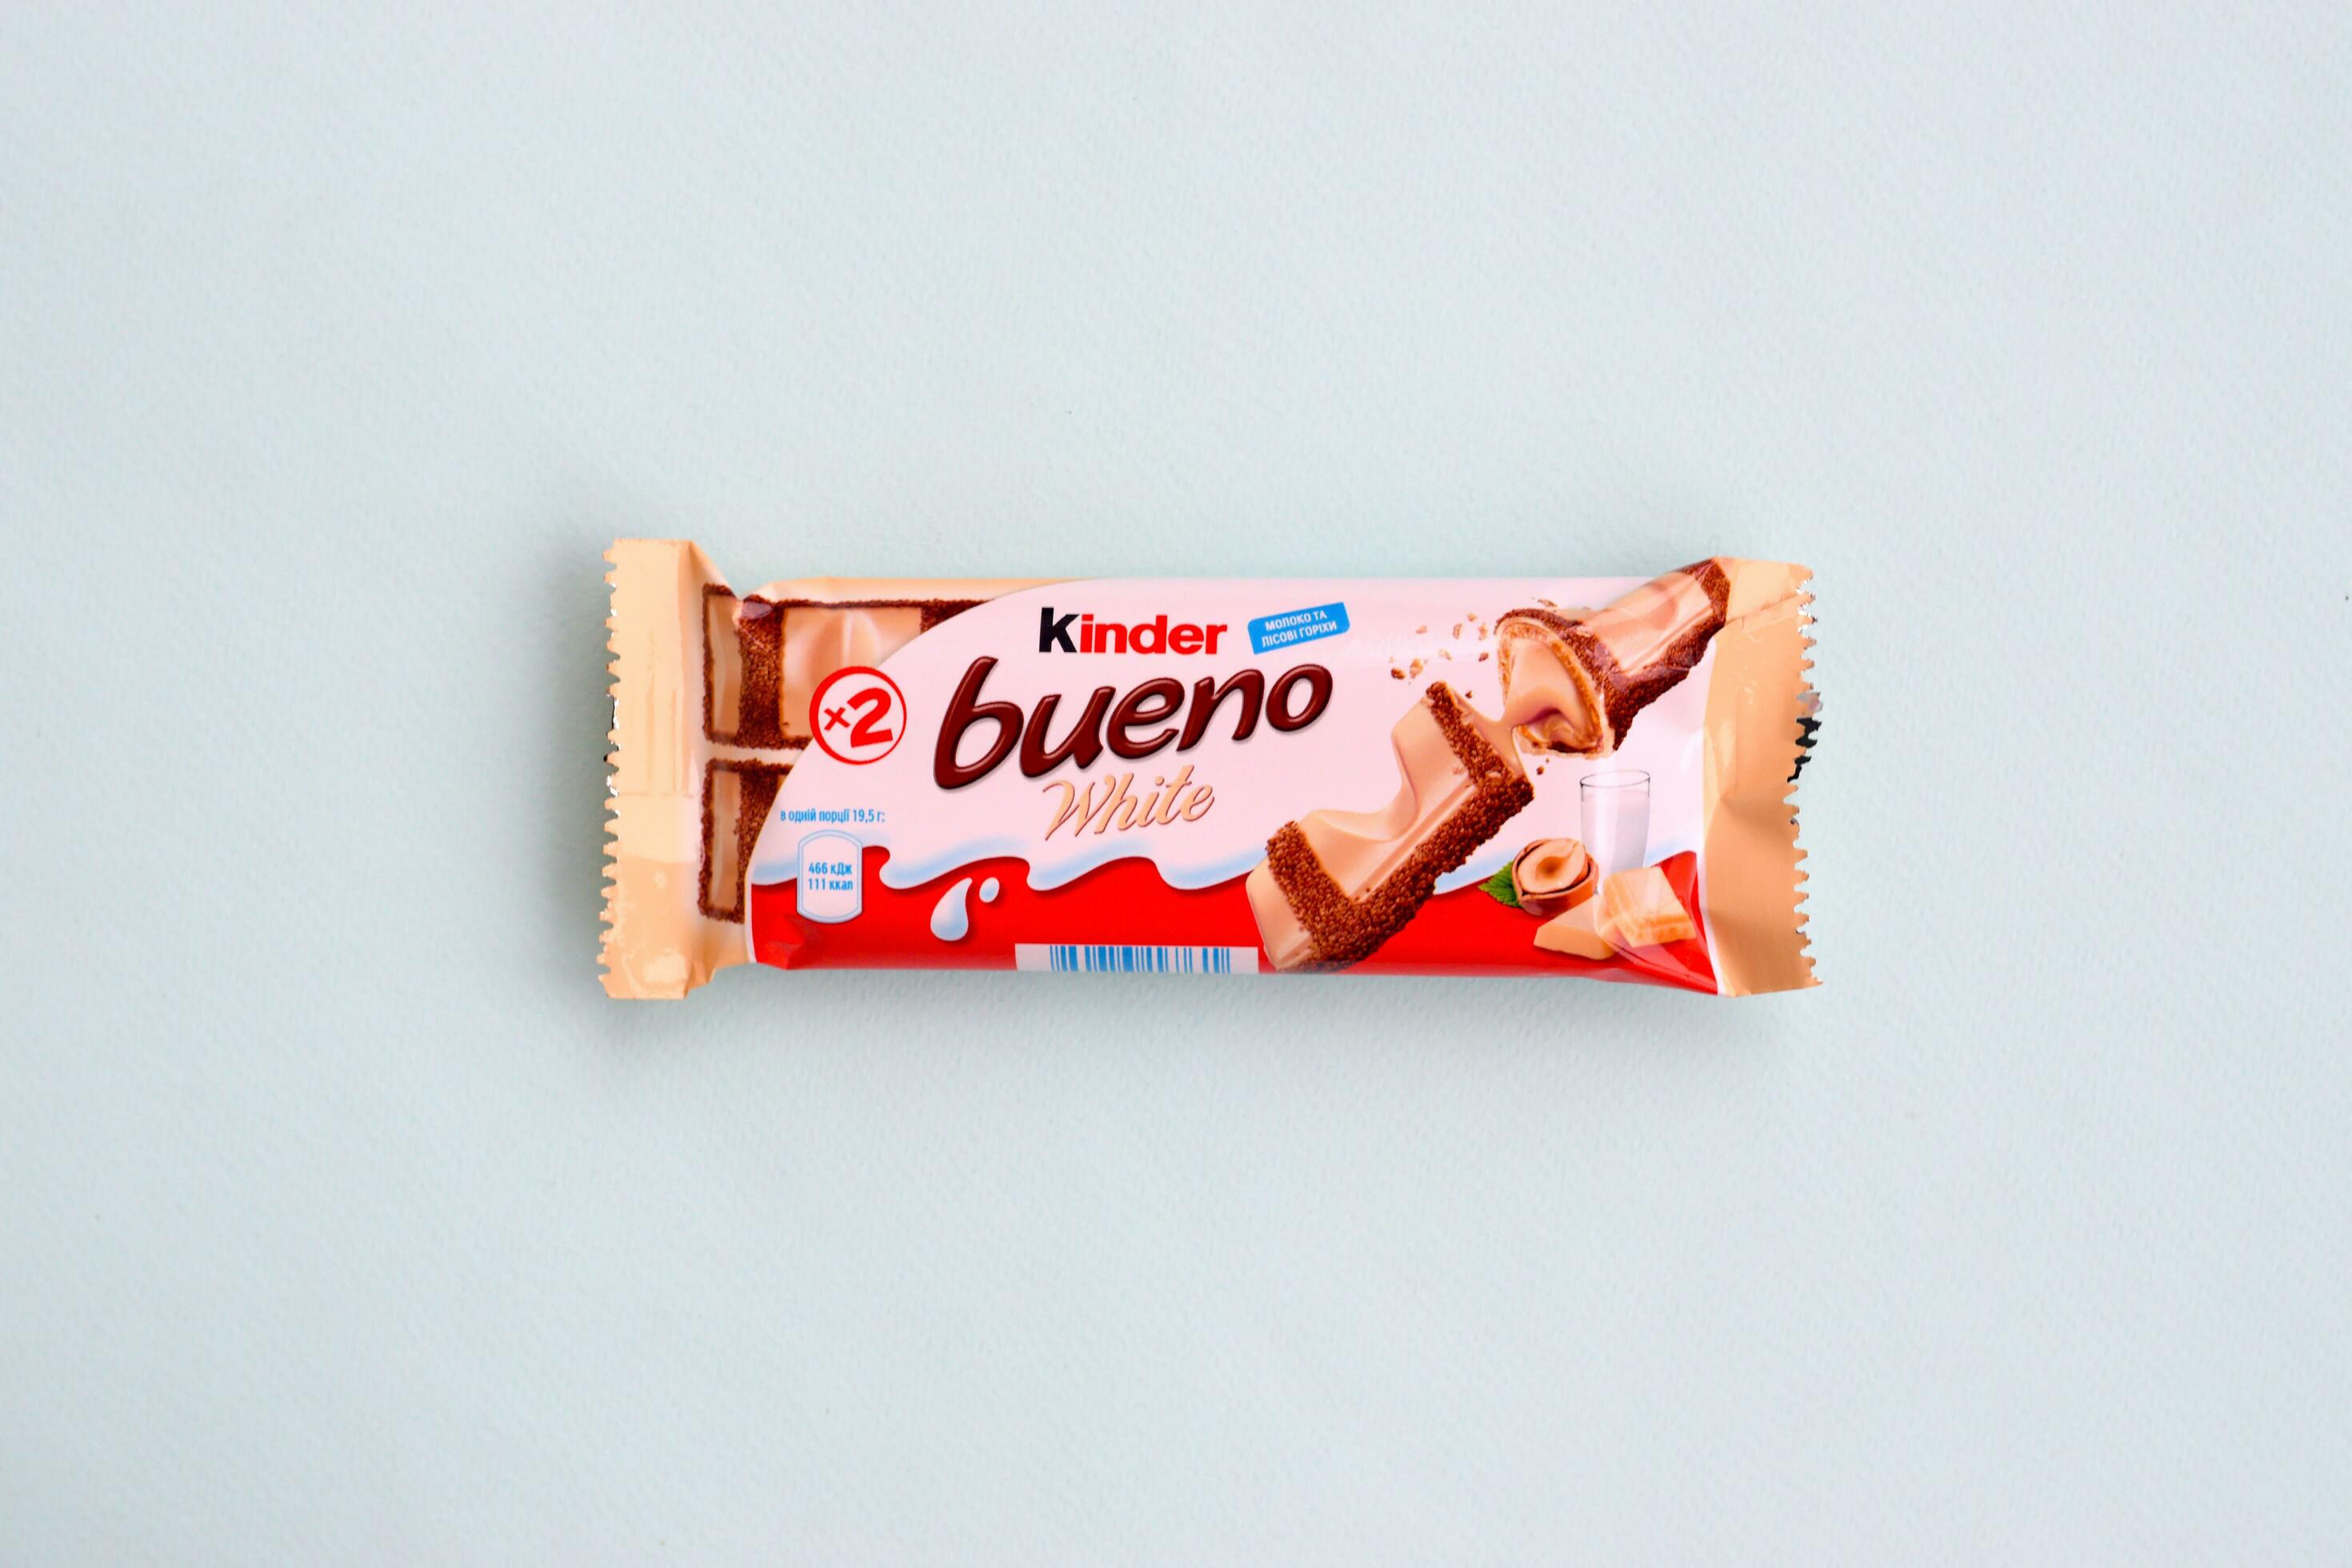 https://static.vecteezy.com/system/resources/previews/031/235/574/large_2x/kinder-bueno-white-chocolate-is-a-confectionery-product-brand-line-of-italian-confectionery-multinational-manufacturer-ferrero-free-photo.JPG